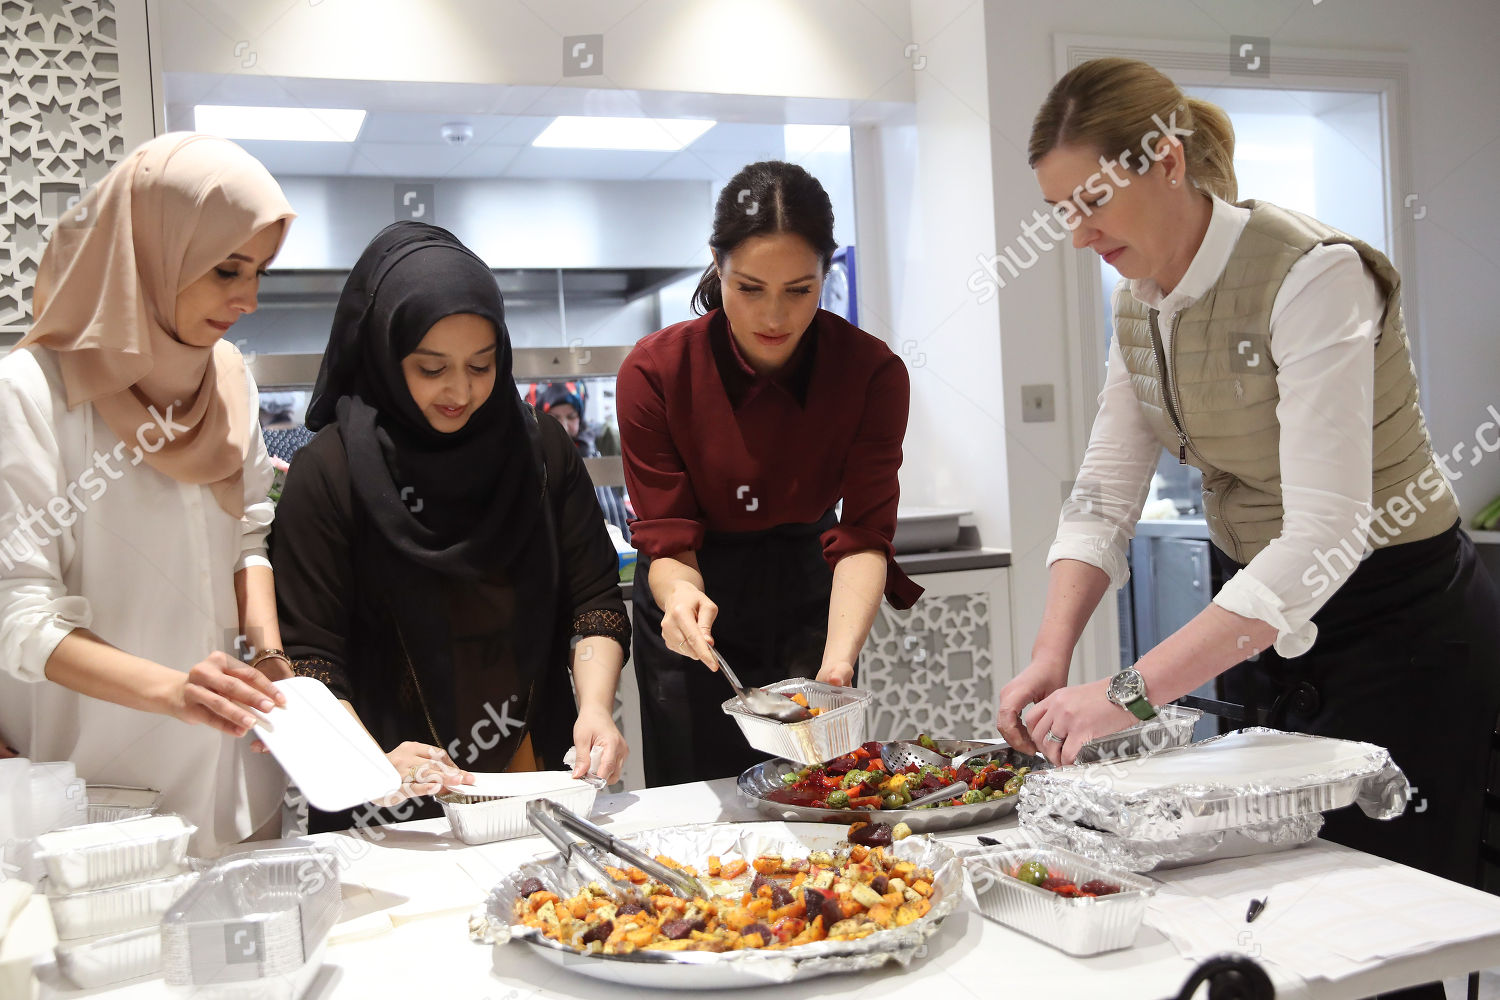 meghan-duchess-of-sussex-visit-to-the-hubb-community-kitchen-london-uk-shutterstock-editorial-9988987af.jpg